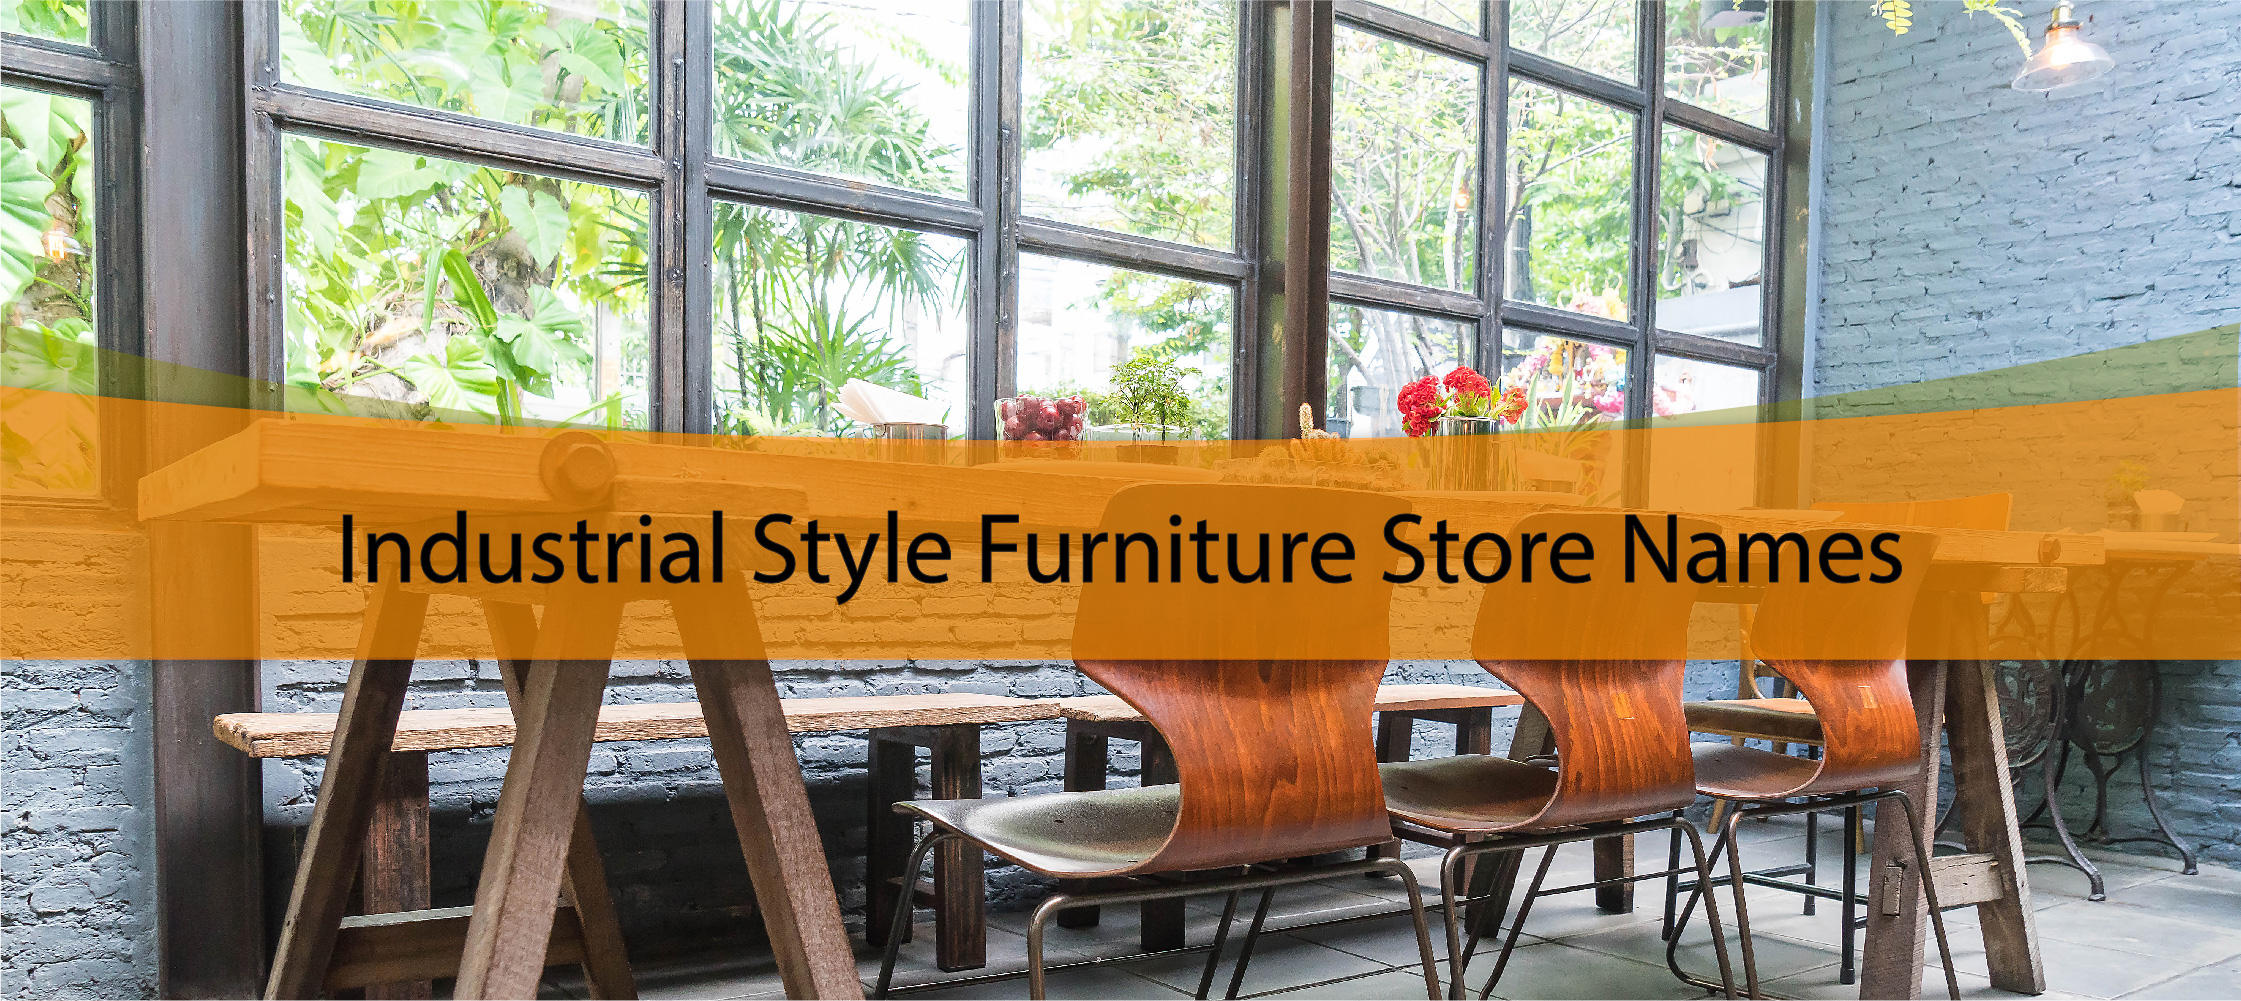 Industrial Style Furniture Store Names